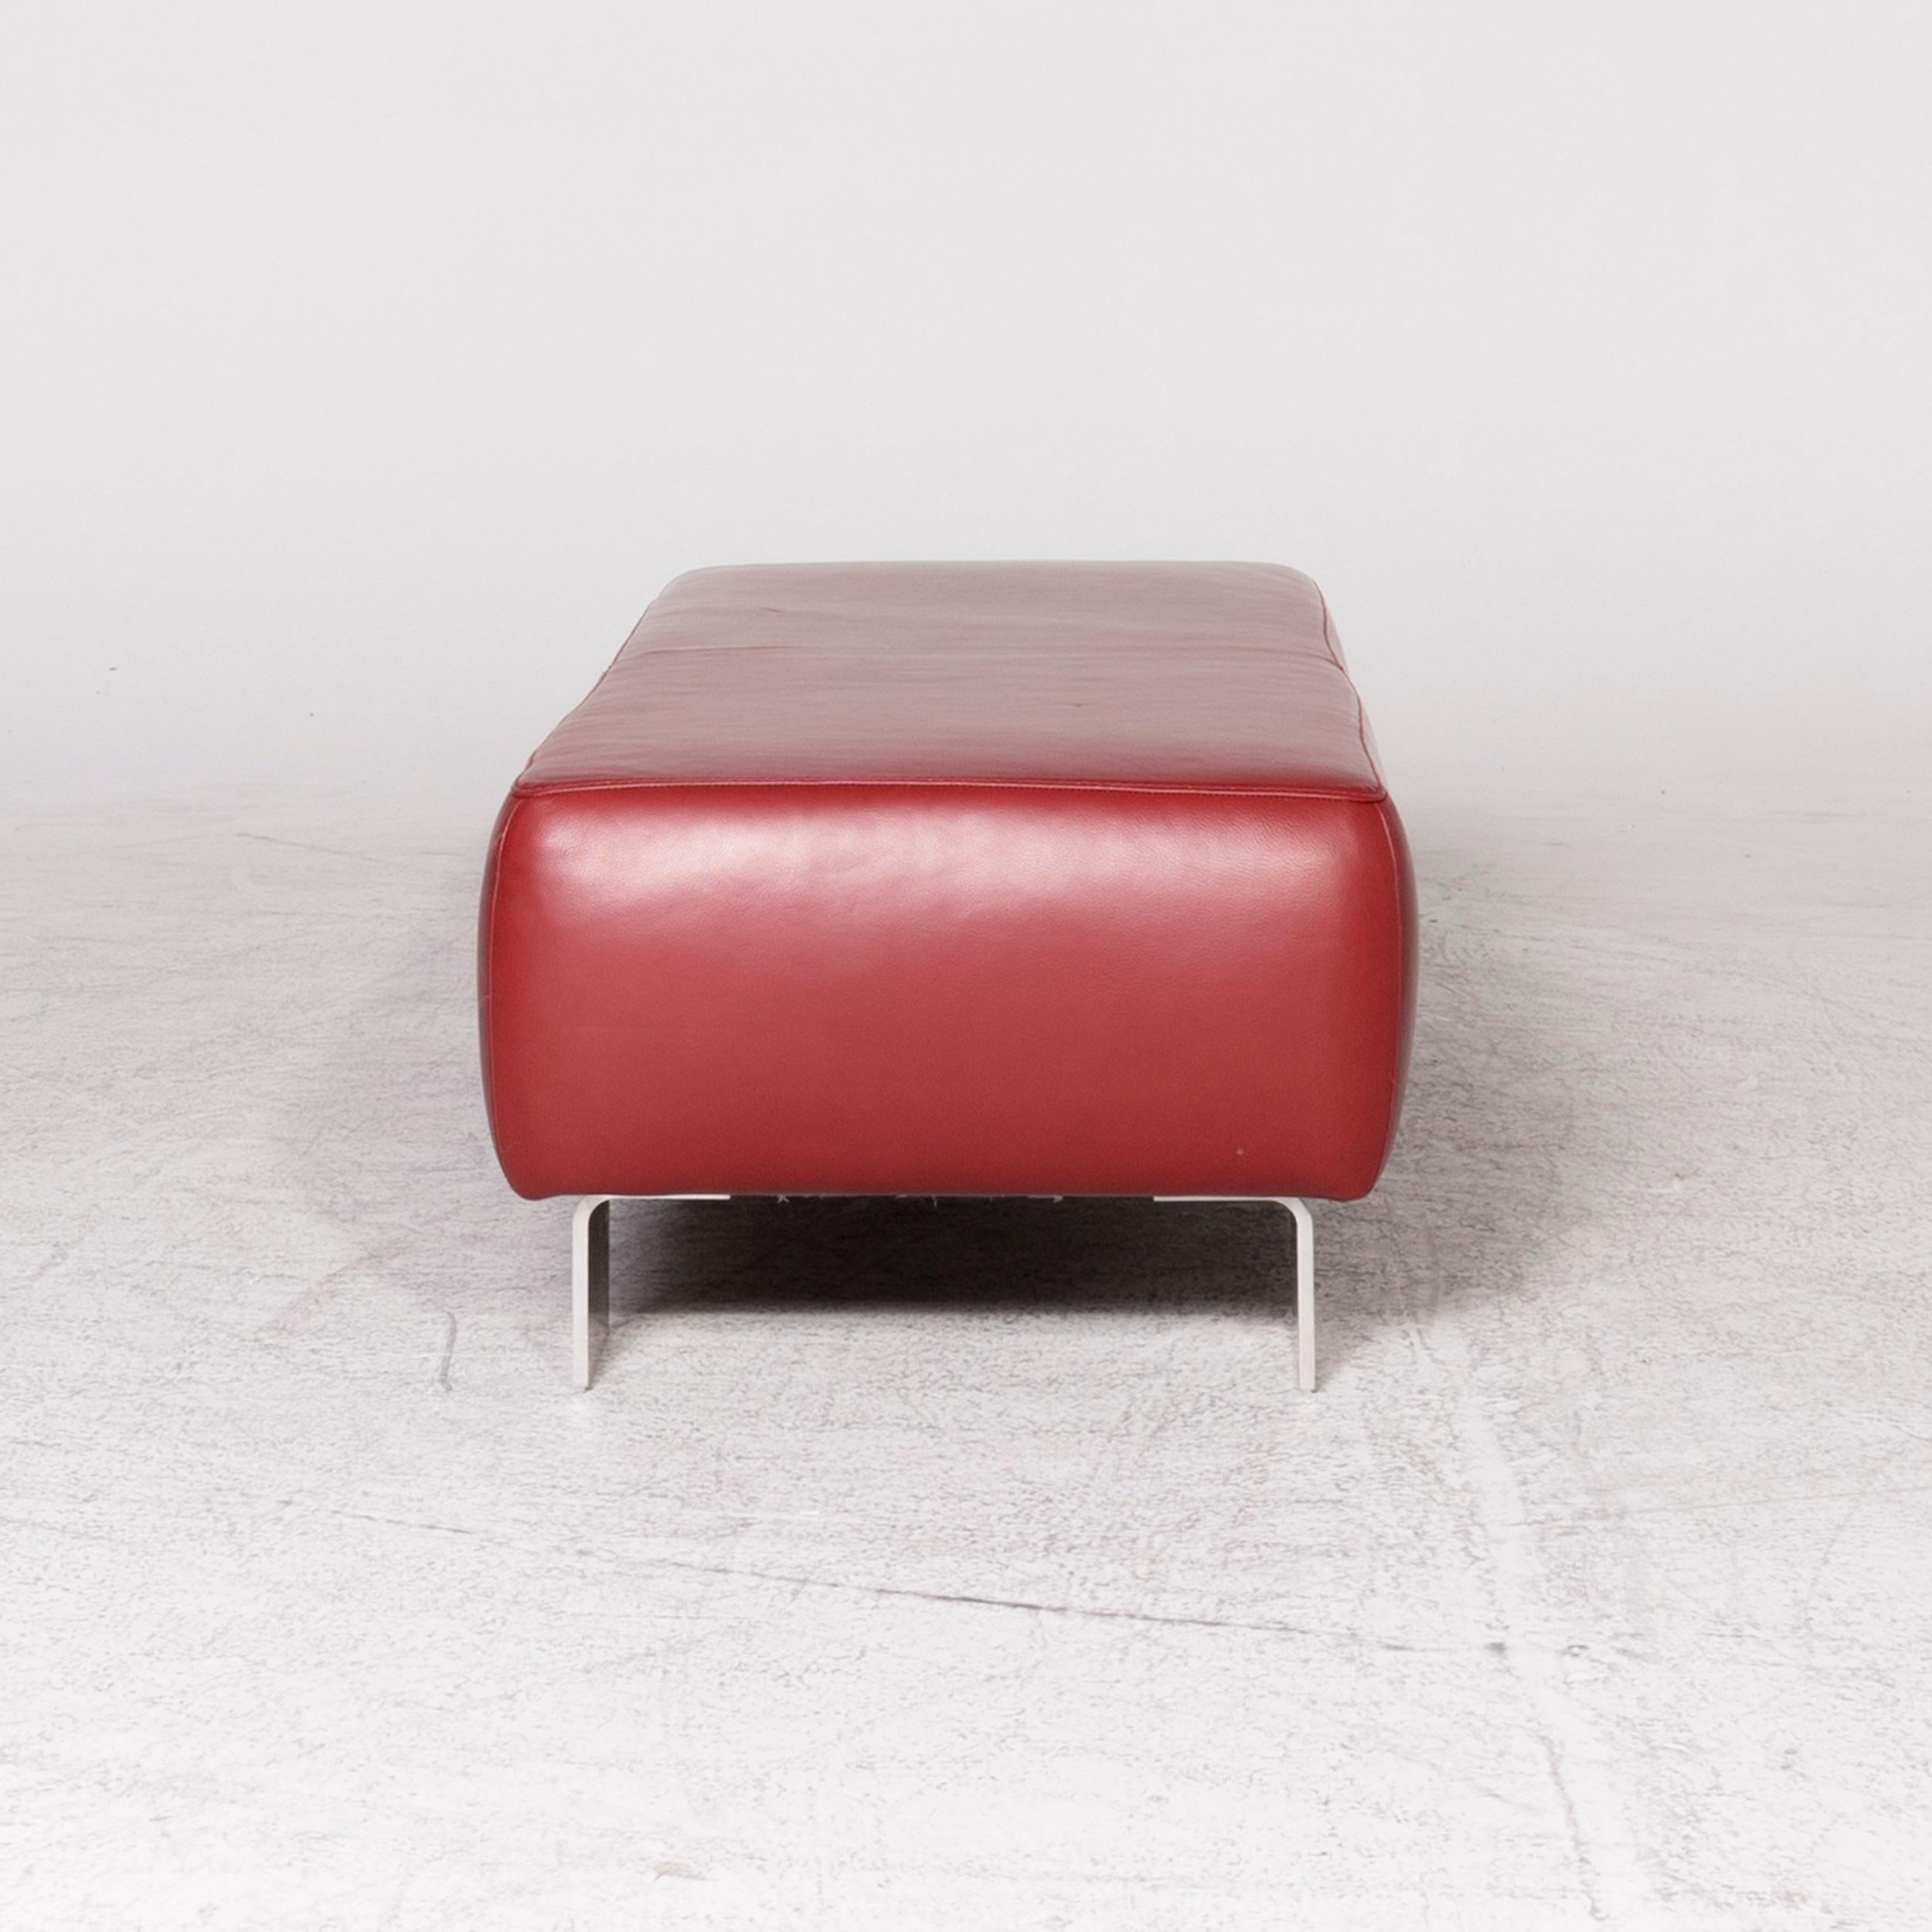 Willi Schillig Taboo Designer Leather Stool Red Genuine Leather Stool For Sale 2